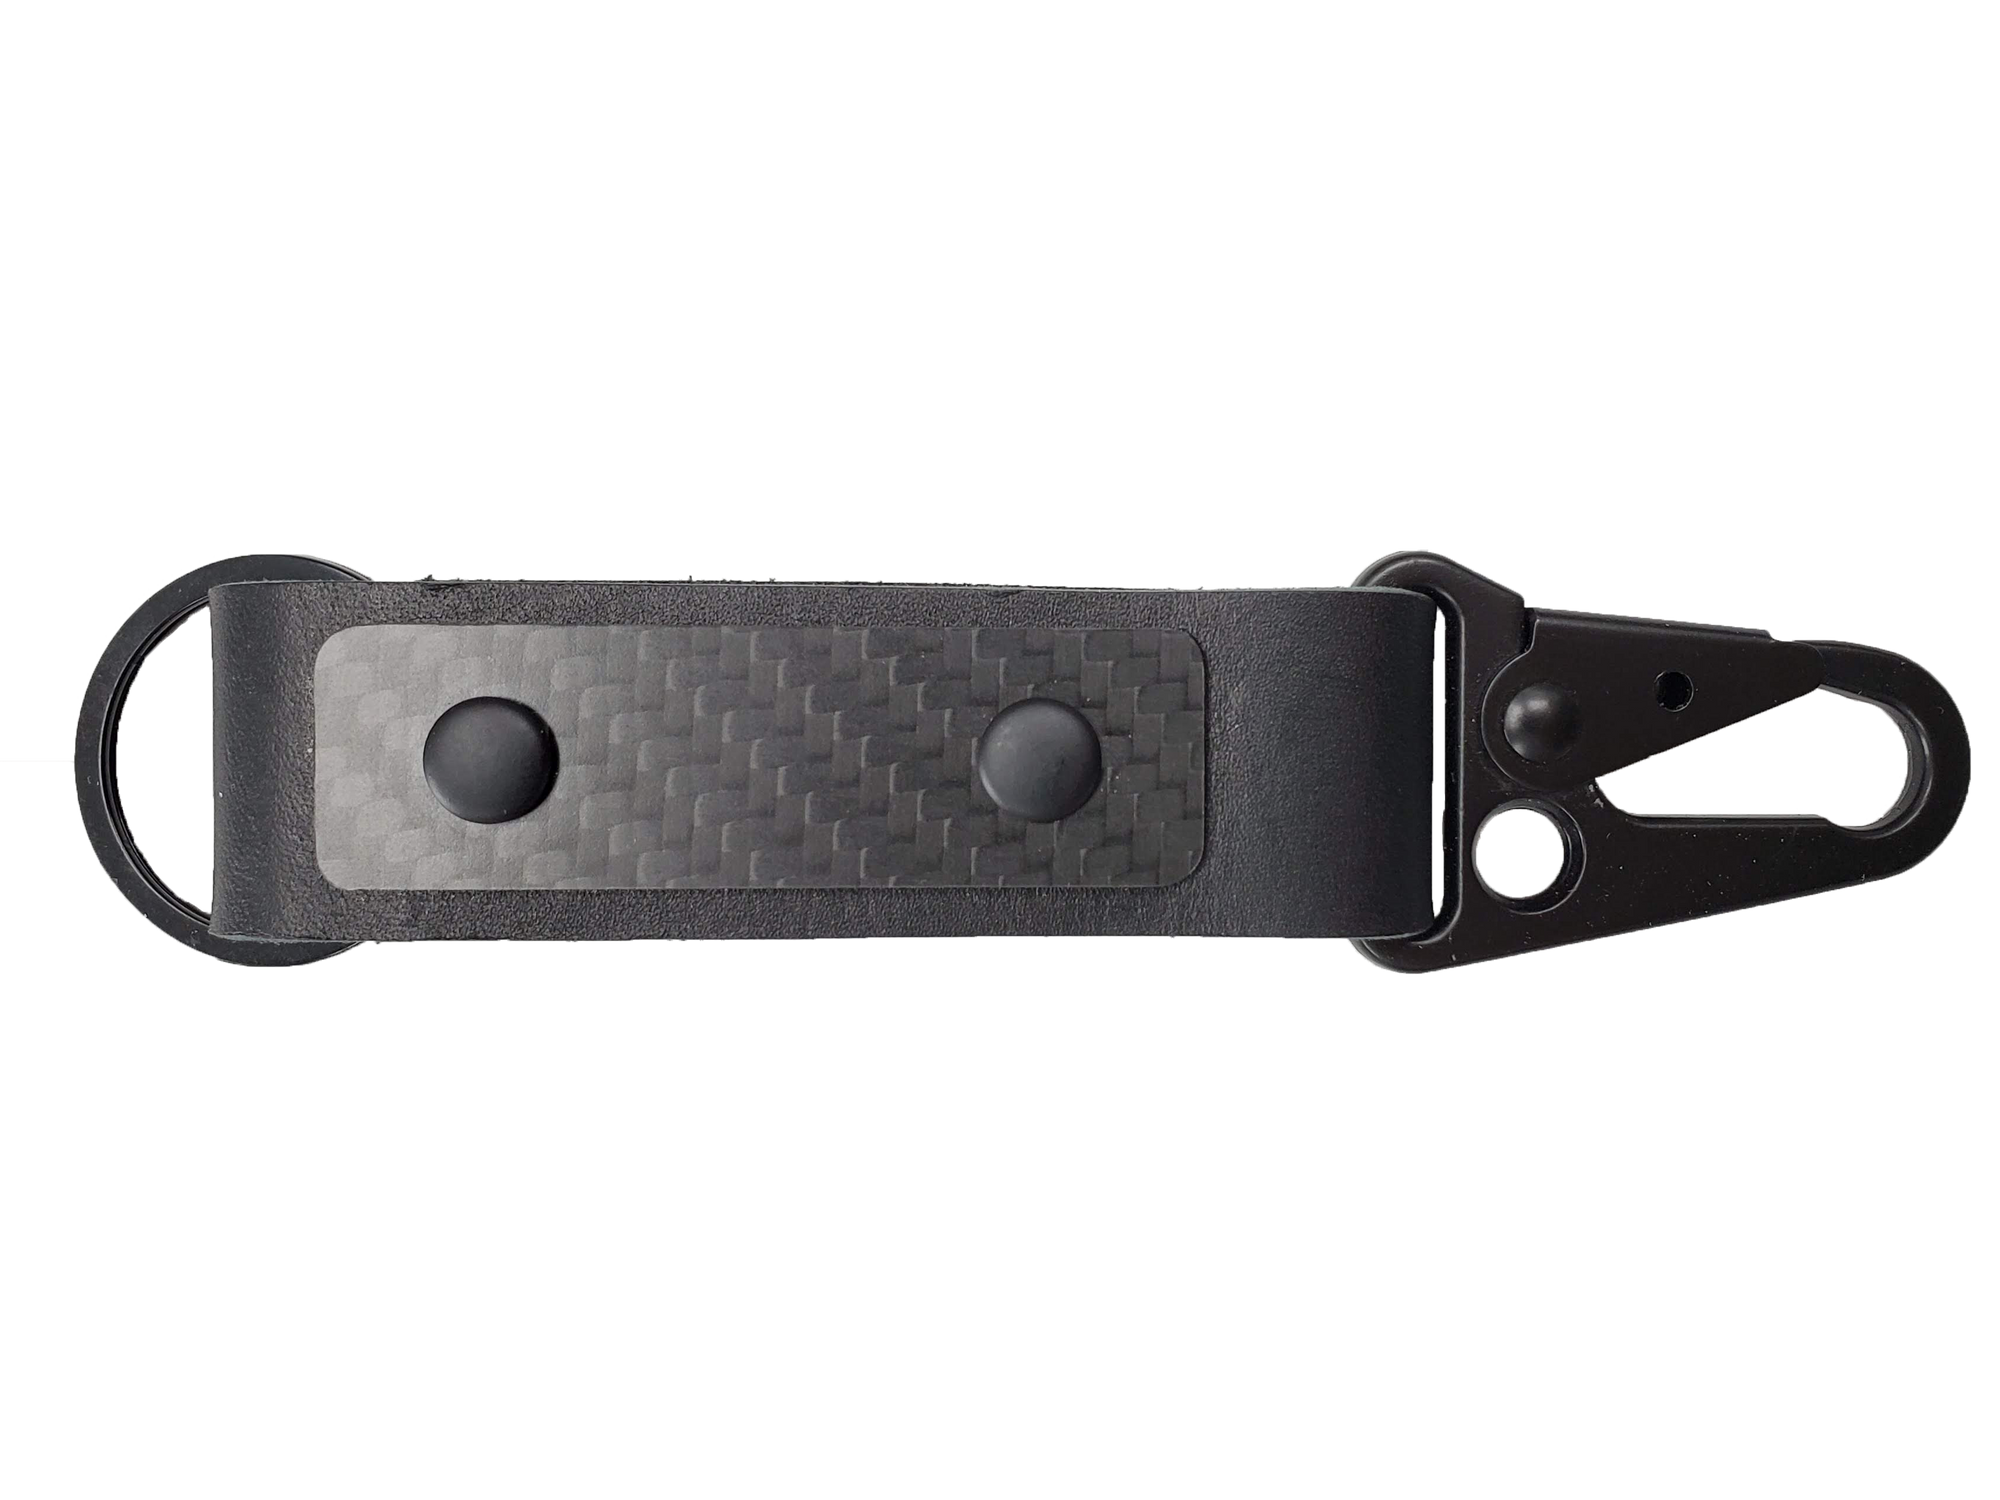 Carbon fiber leather keychain with sturdy aluminum clip, carbon fiber side showing